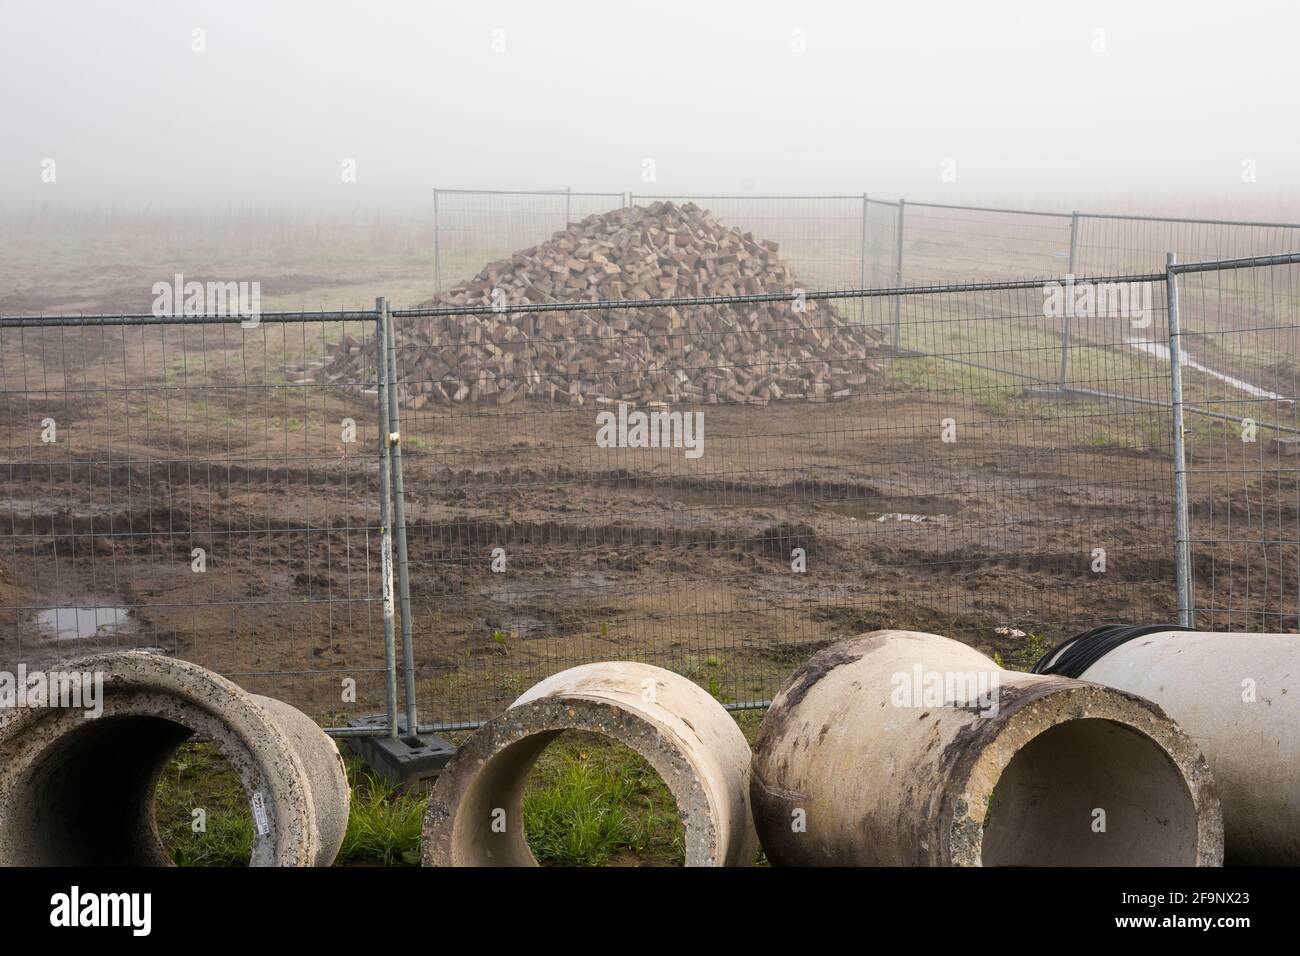 Sewer pipes and a stack of pavers behind a fence at building site in the mist, Netherlands Stock Photo